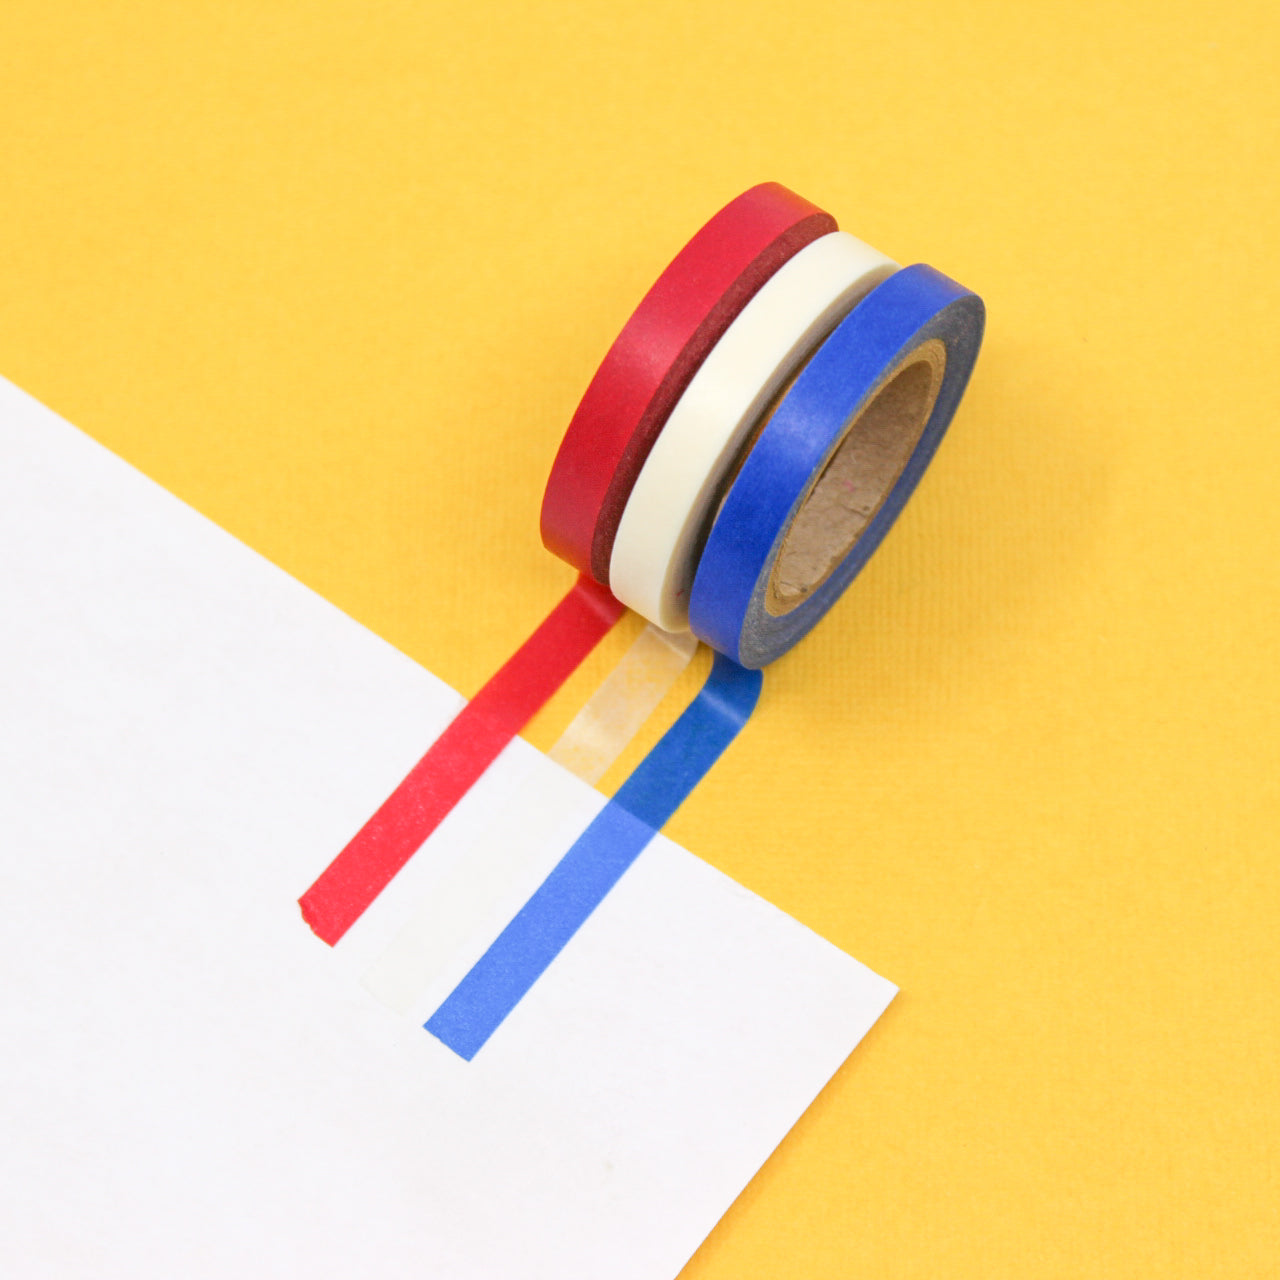 Celebrate with our Red, White, and Blue Parade Colors Narrow Solid Washi Tape Set. This set features a patriotic collection of narrow washi tapes in classic parade colors, perfect for adding a festive and spirited touch to your projects. This set is sold at BBB Supplies Craft Shop.